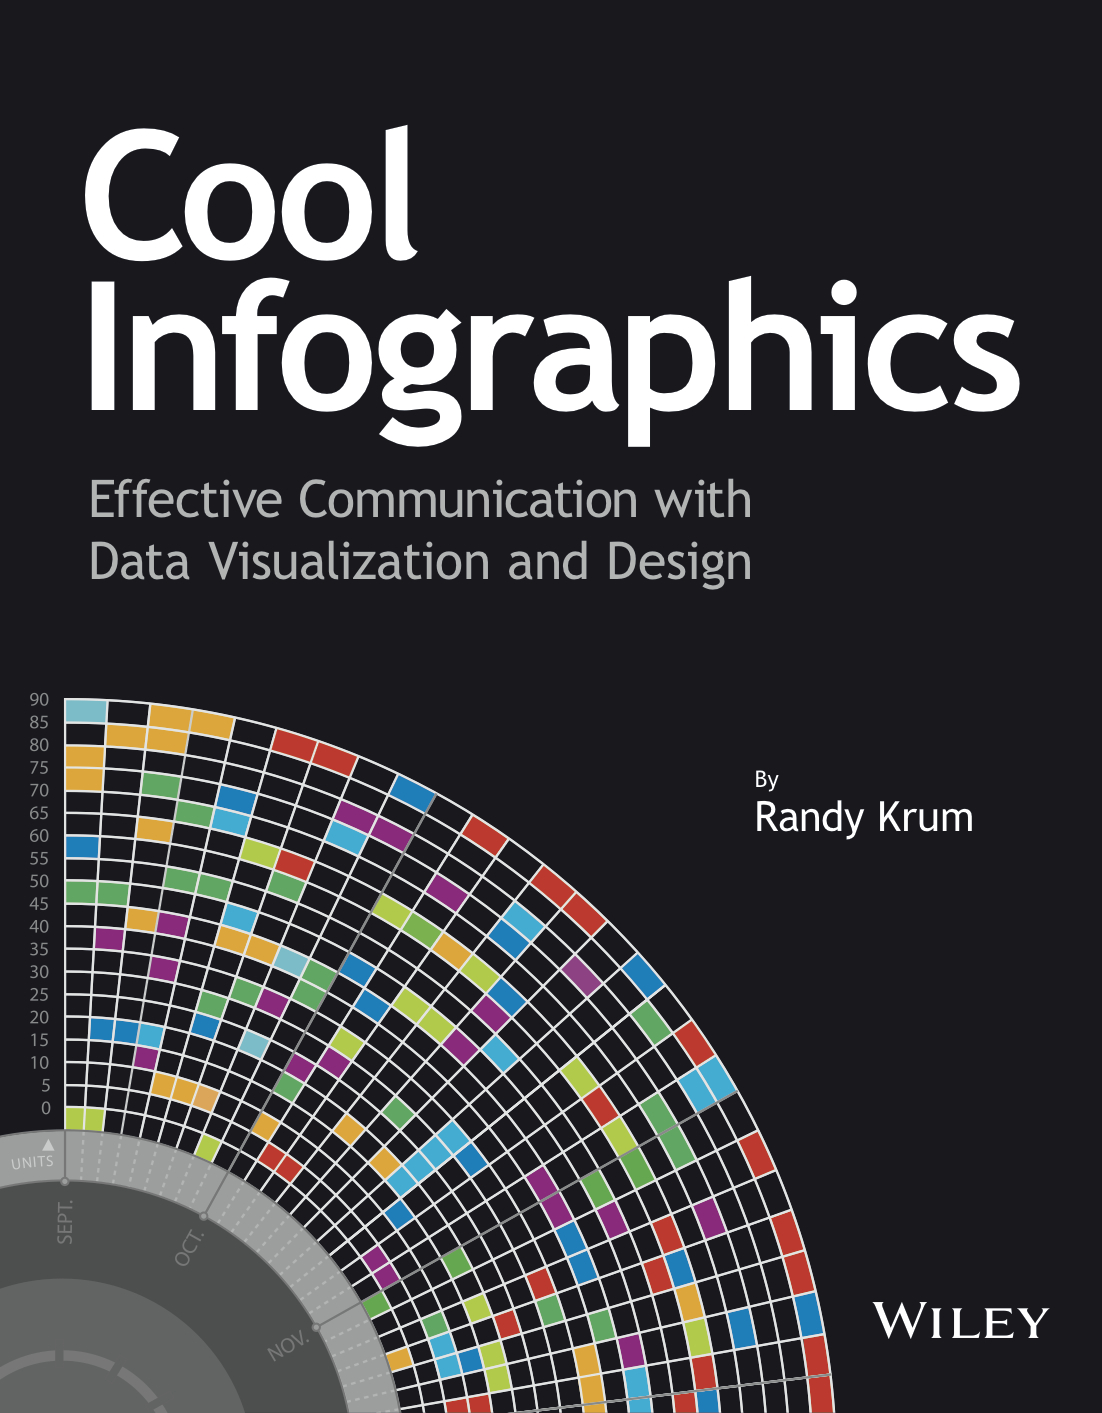 Introducing Cool Infographics, the book